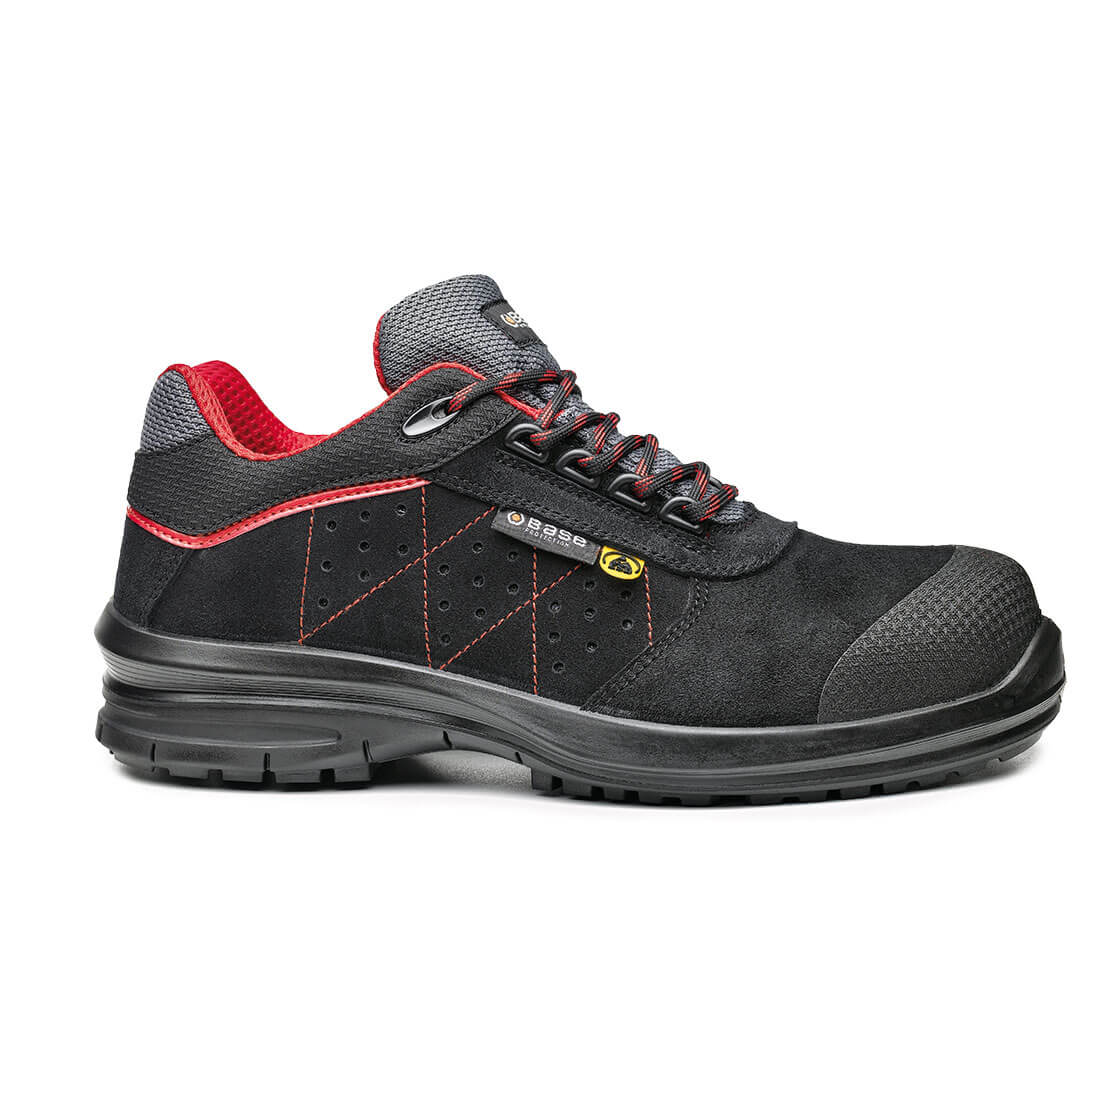 Base Cursa Toe Cap Work Safety Shoes Black/Red 1#colour_black-red